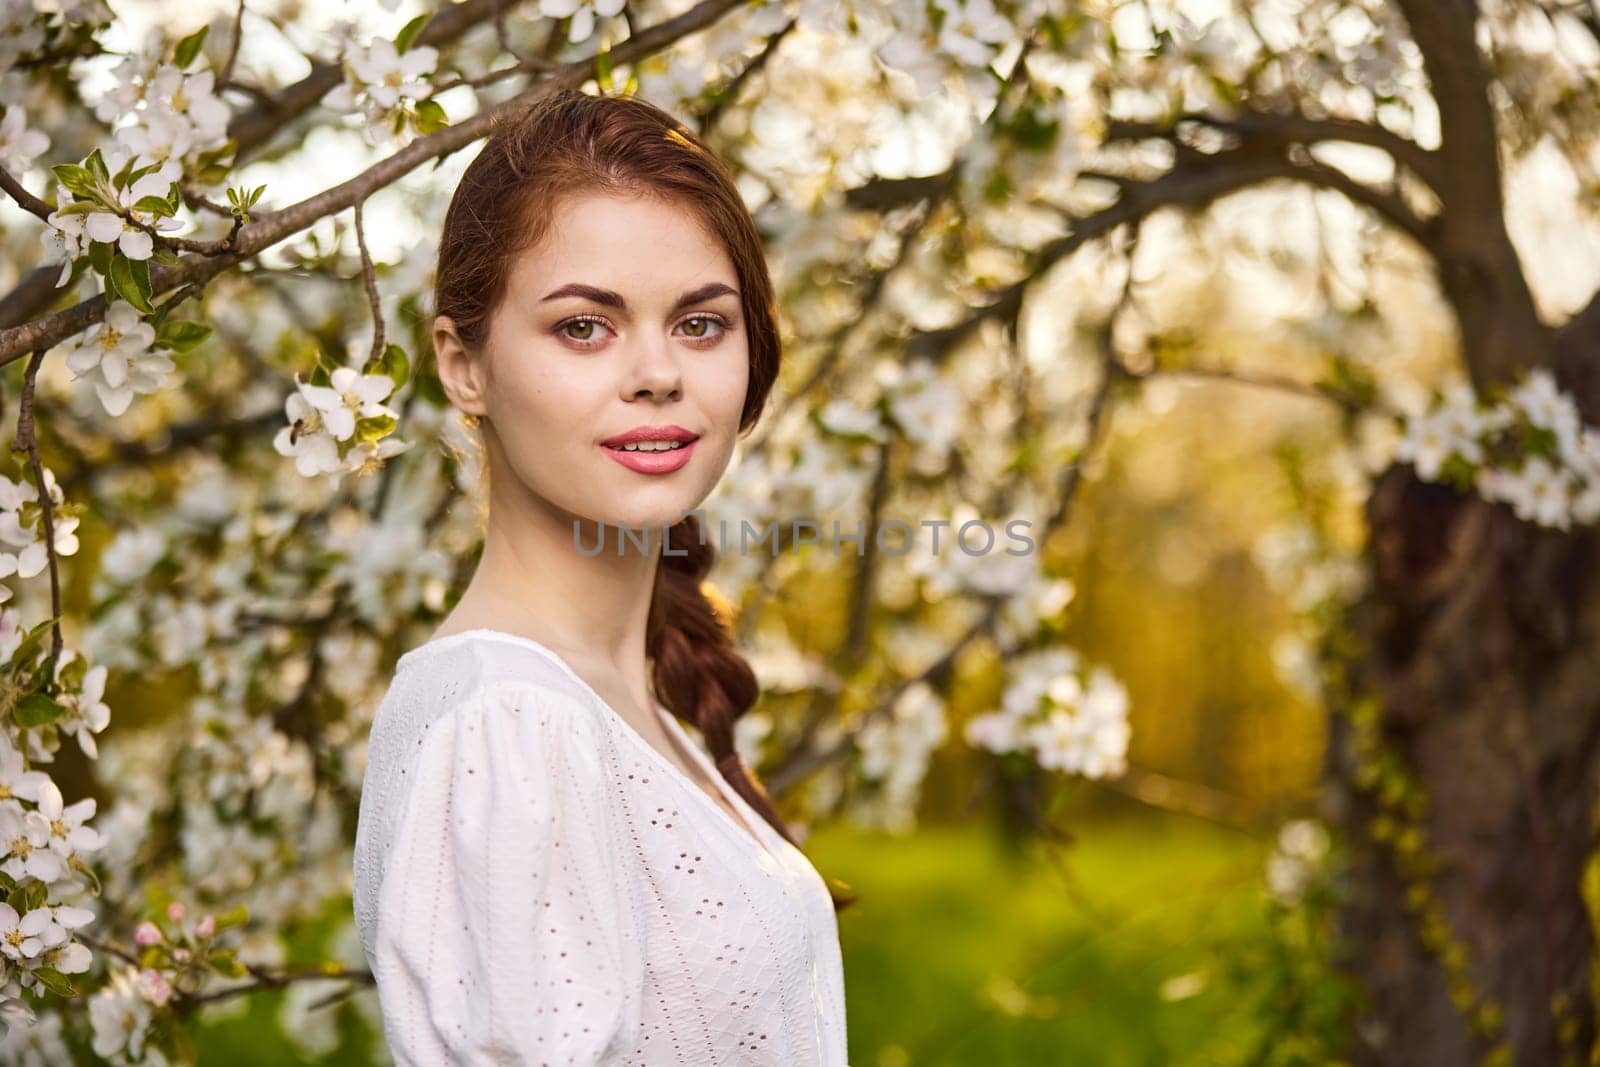 a sweet, young woman stands in a blooming garden in a light dress. High quality photo